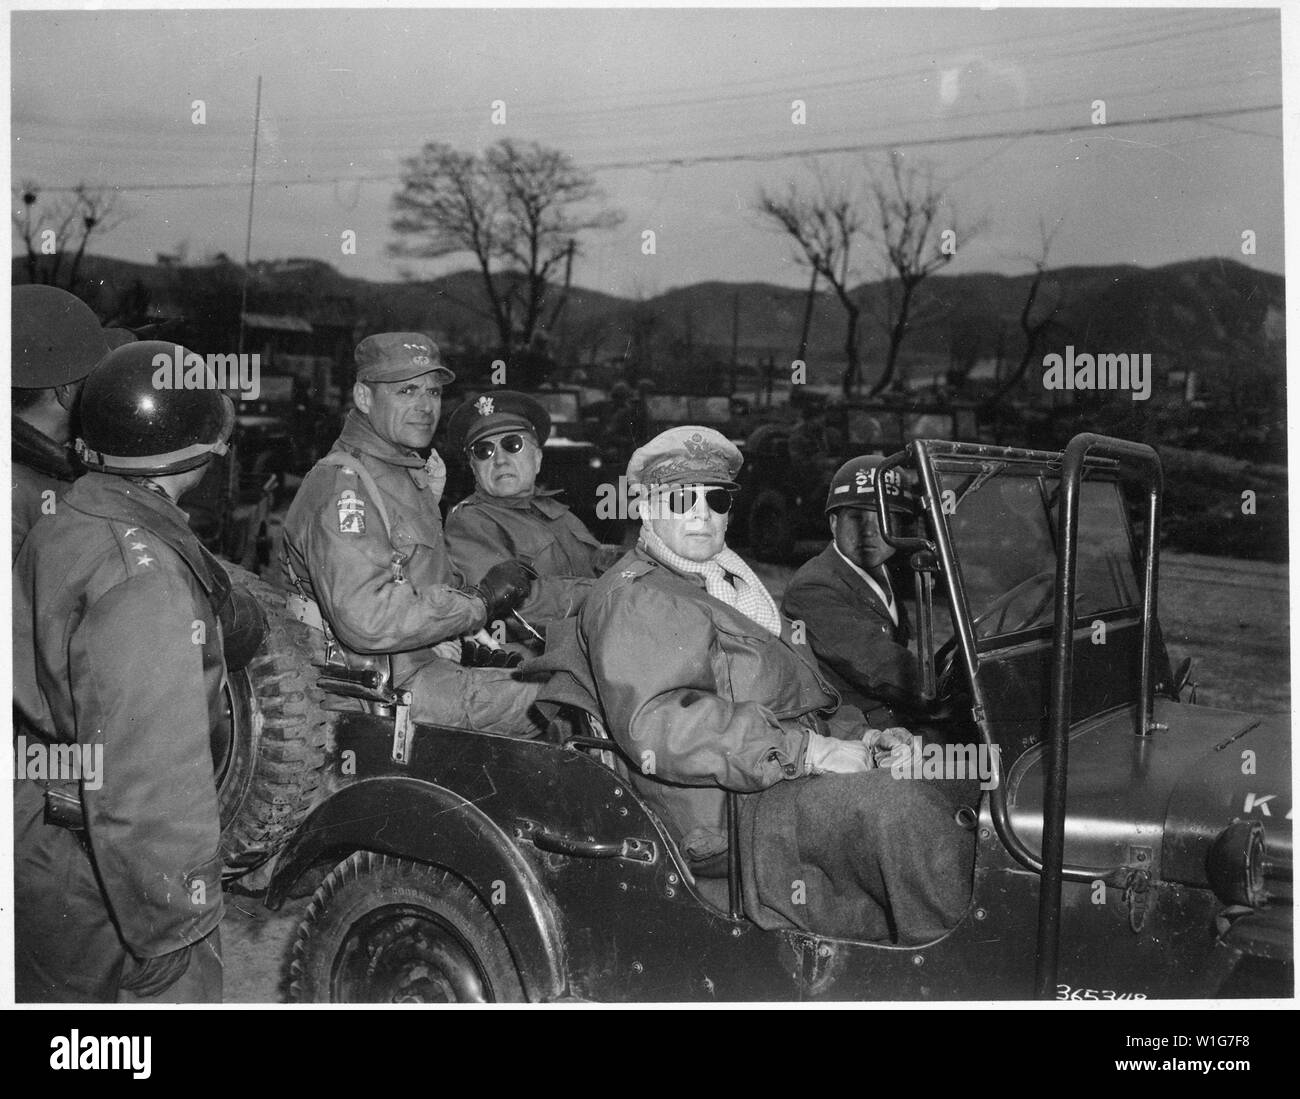 Lieutenant General Matthew Ridgway; Major General Doyle Hickey; and General Douglas MacArthur, Commander in Chief of United Nations Forces in Korea, in a jeep at a command post, Yang Yang, Korea, approximately 15 miles north of the 38th parallel, April 3, 1951.; General notes:  Use War and Conflict Number 1376 when ordering a reproduction or requesting information about this image. Stock Photo